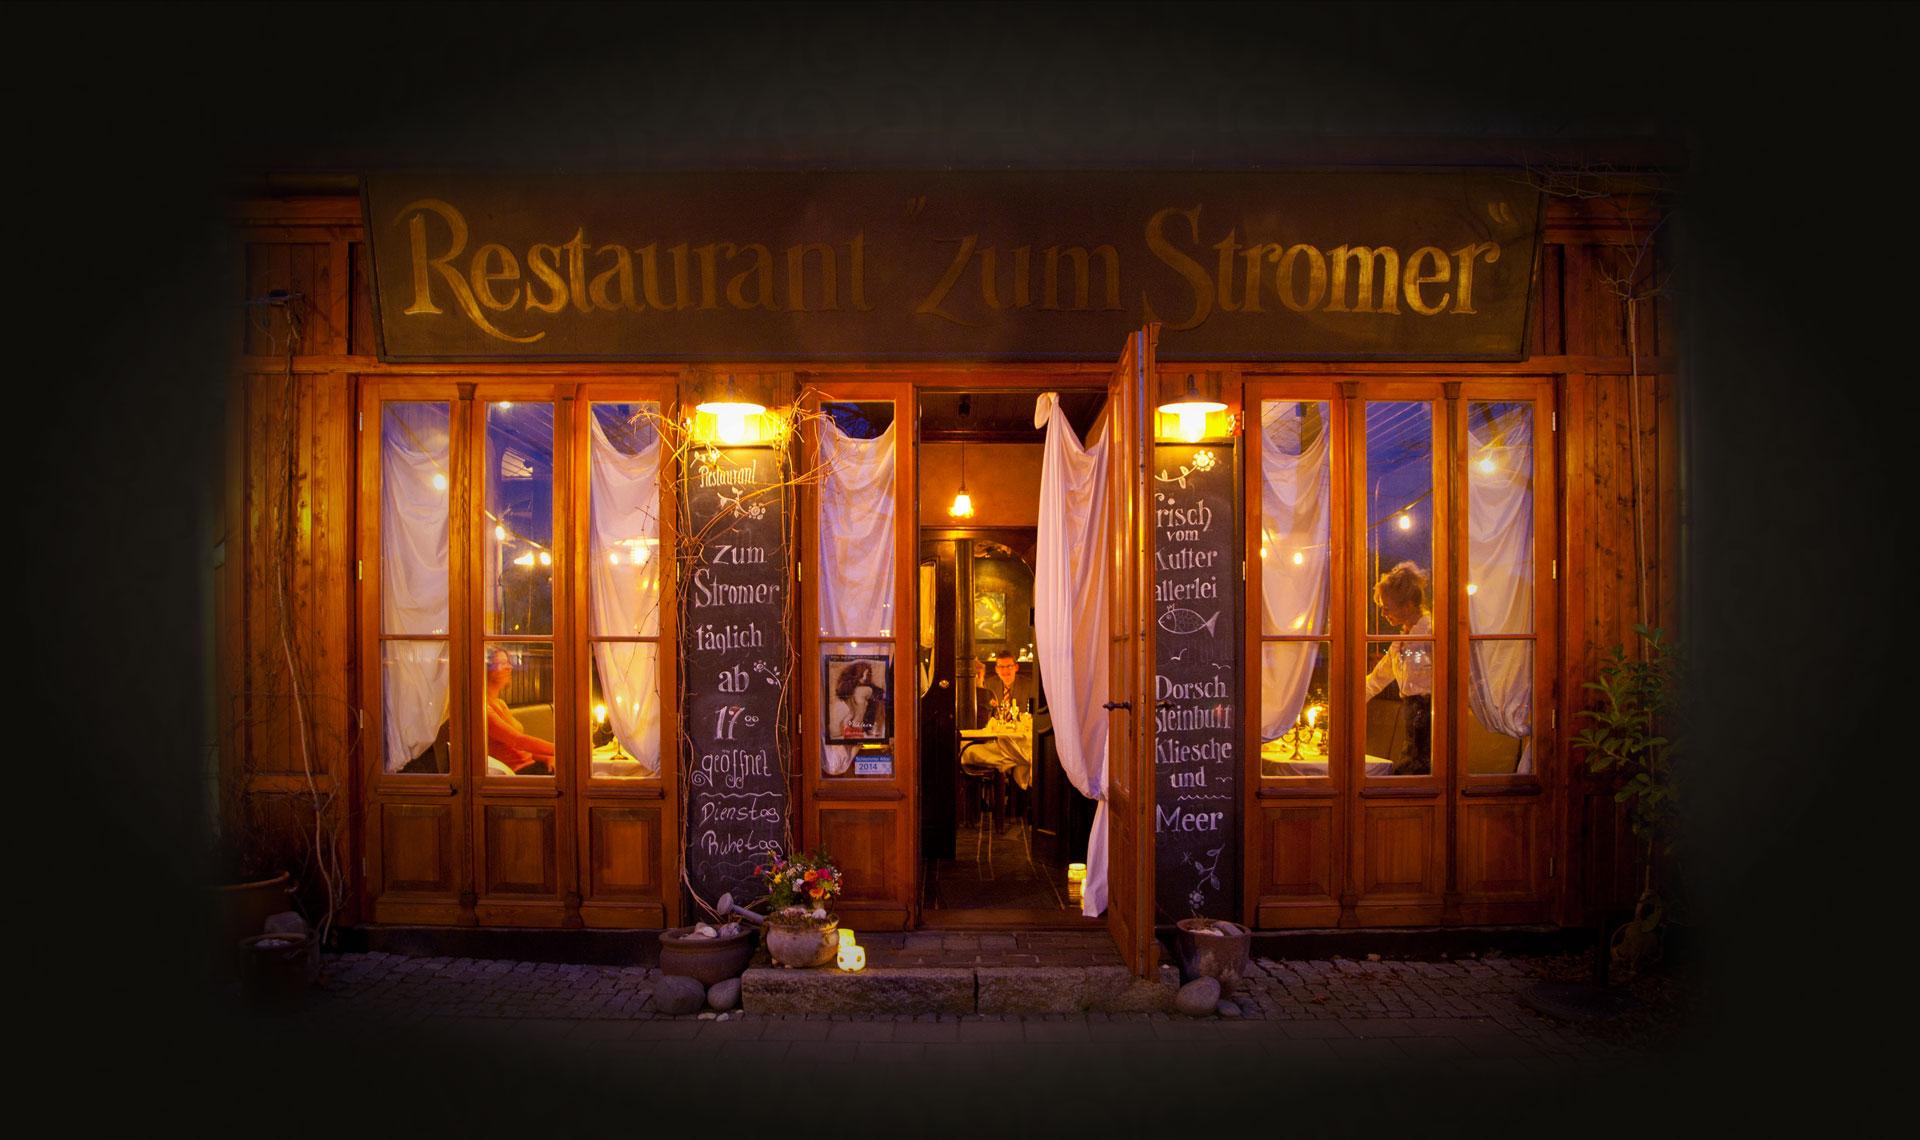 Cover image of this place Zum Stromer